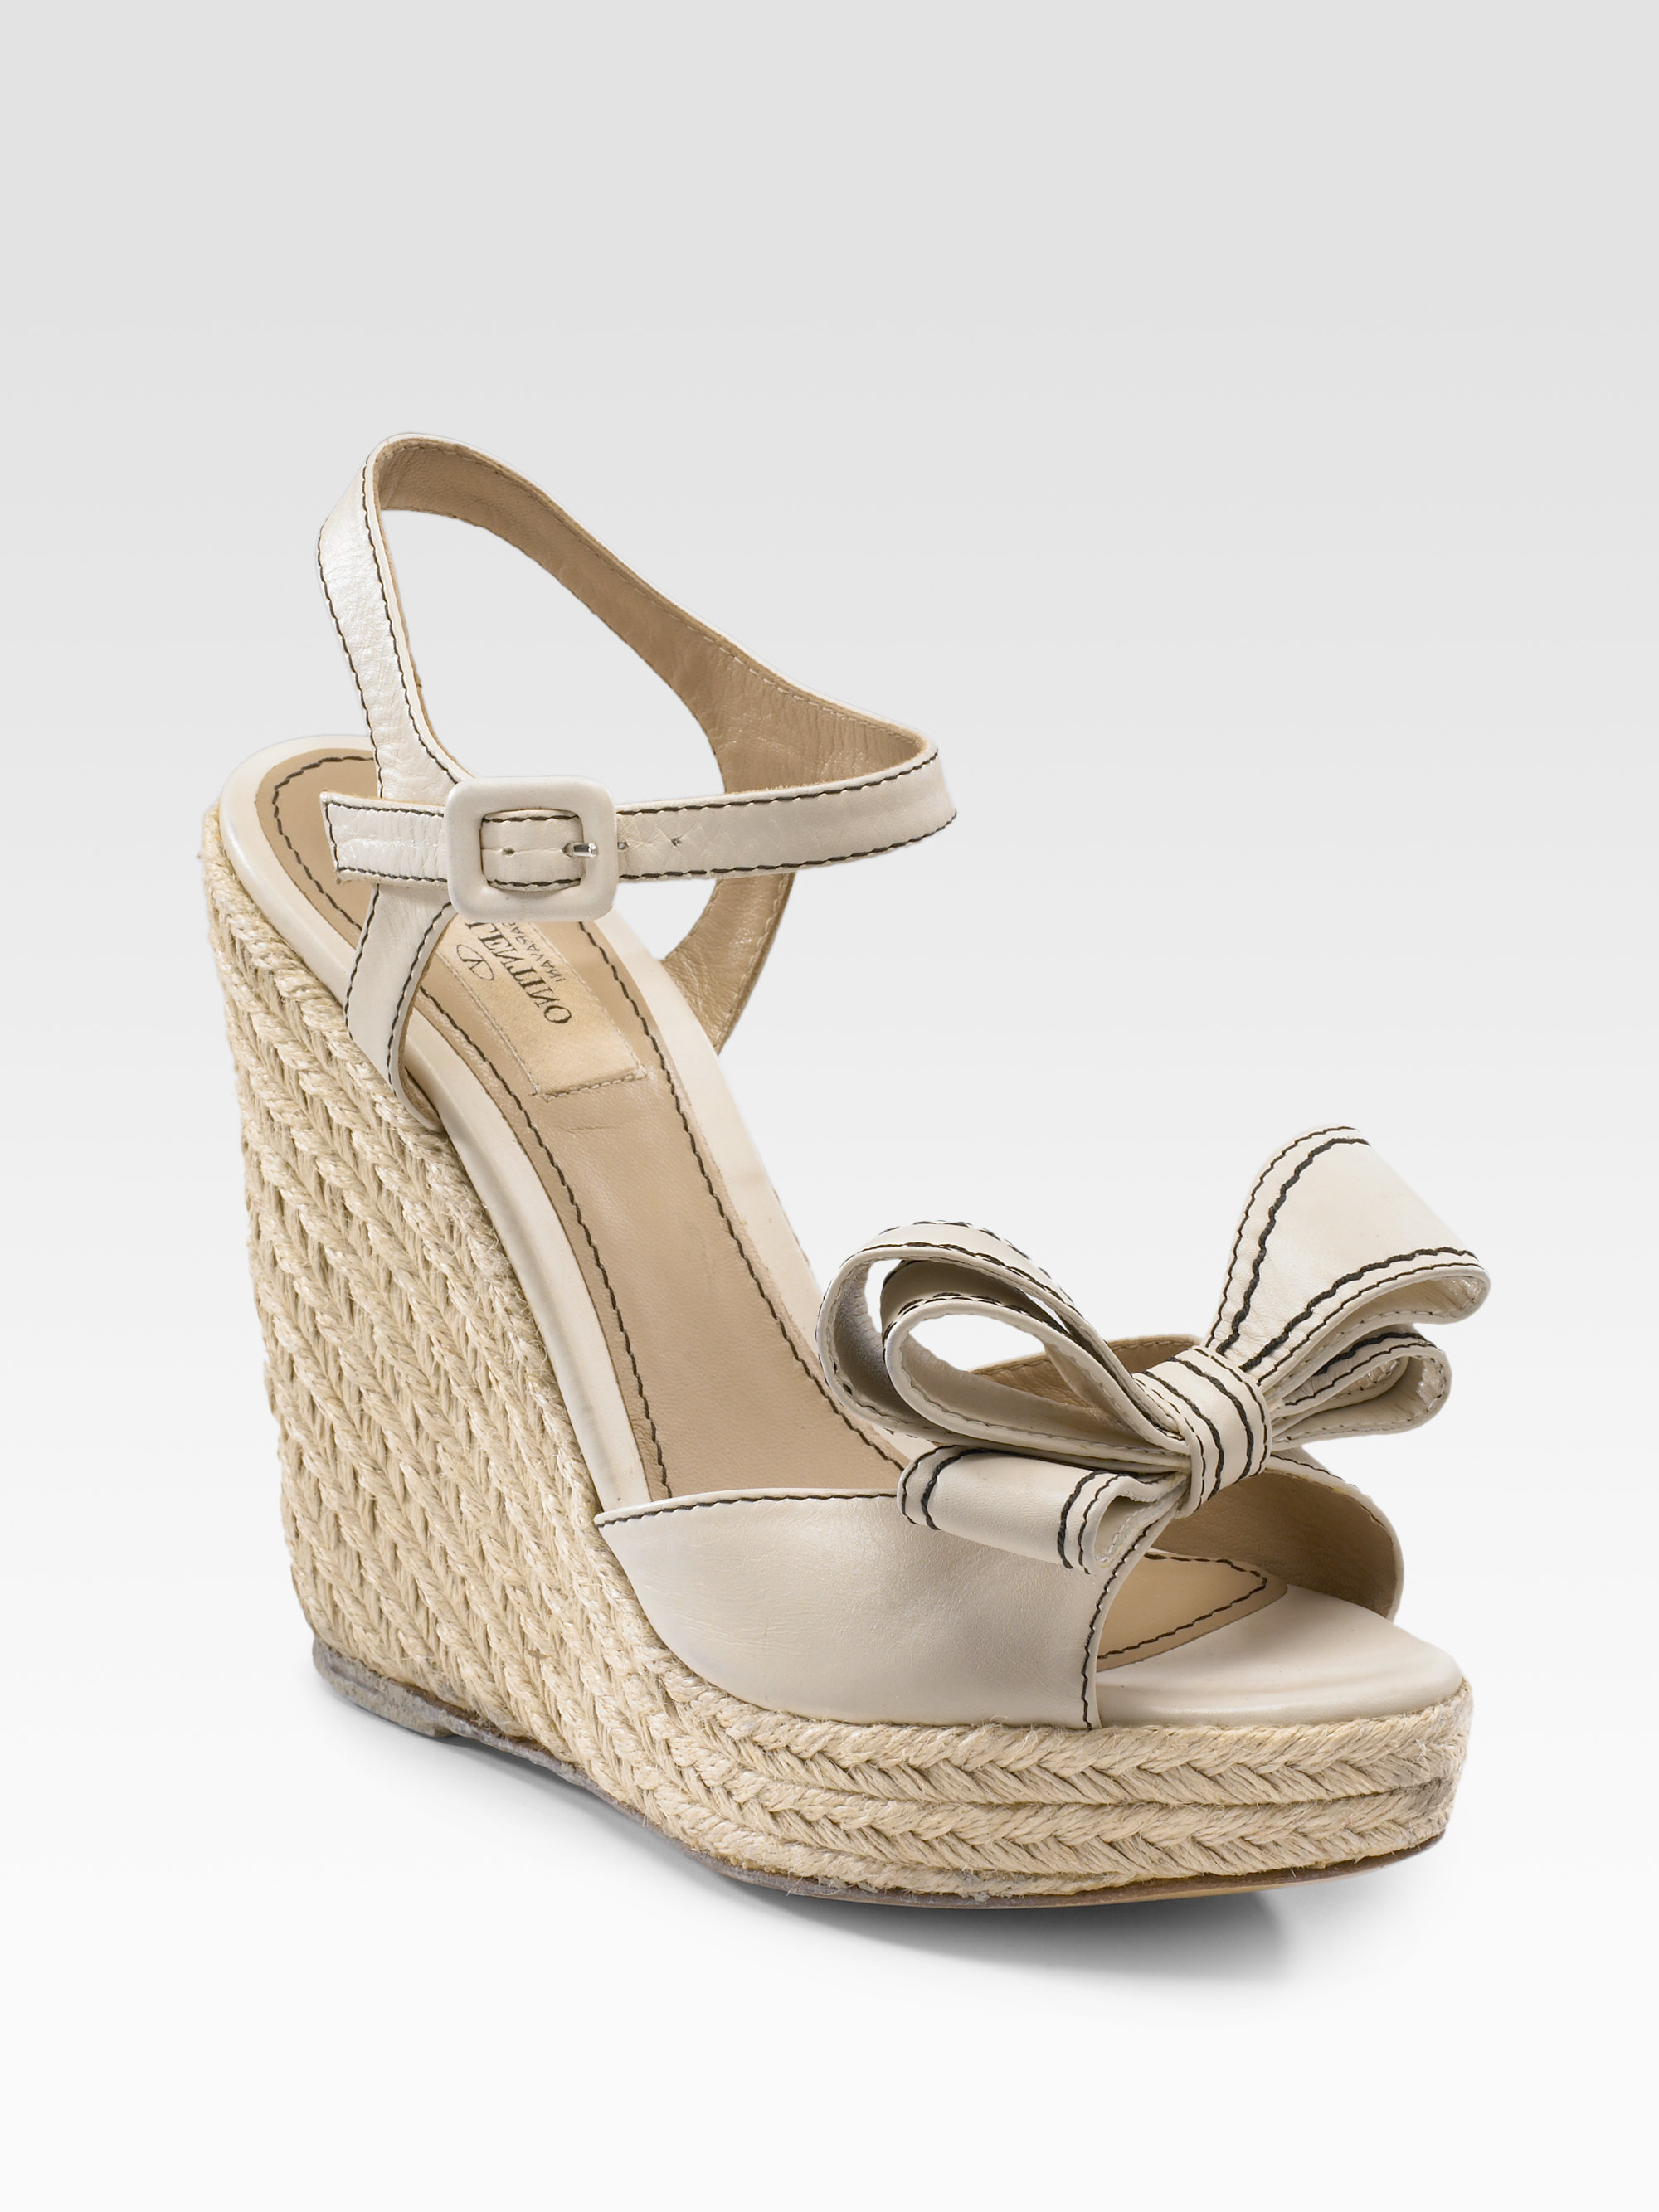 Valentino Couture Bow Espadrille Wedges in Natural | Lyst